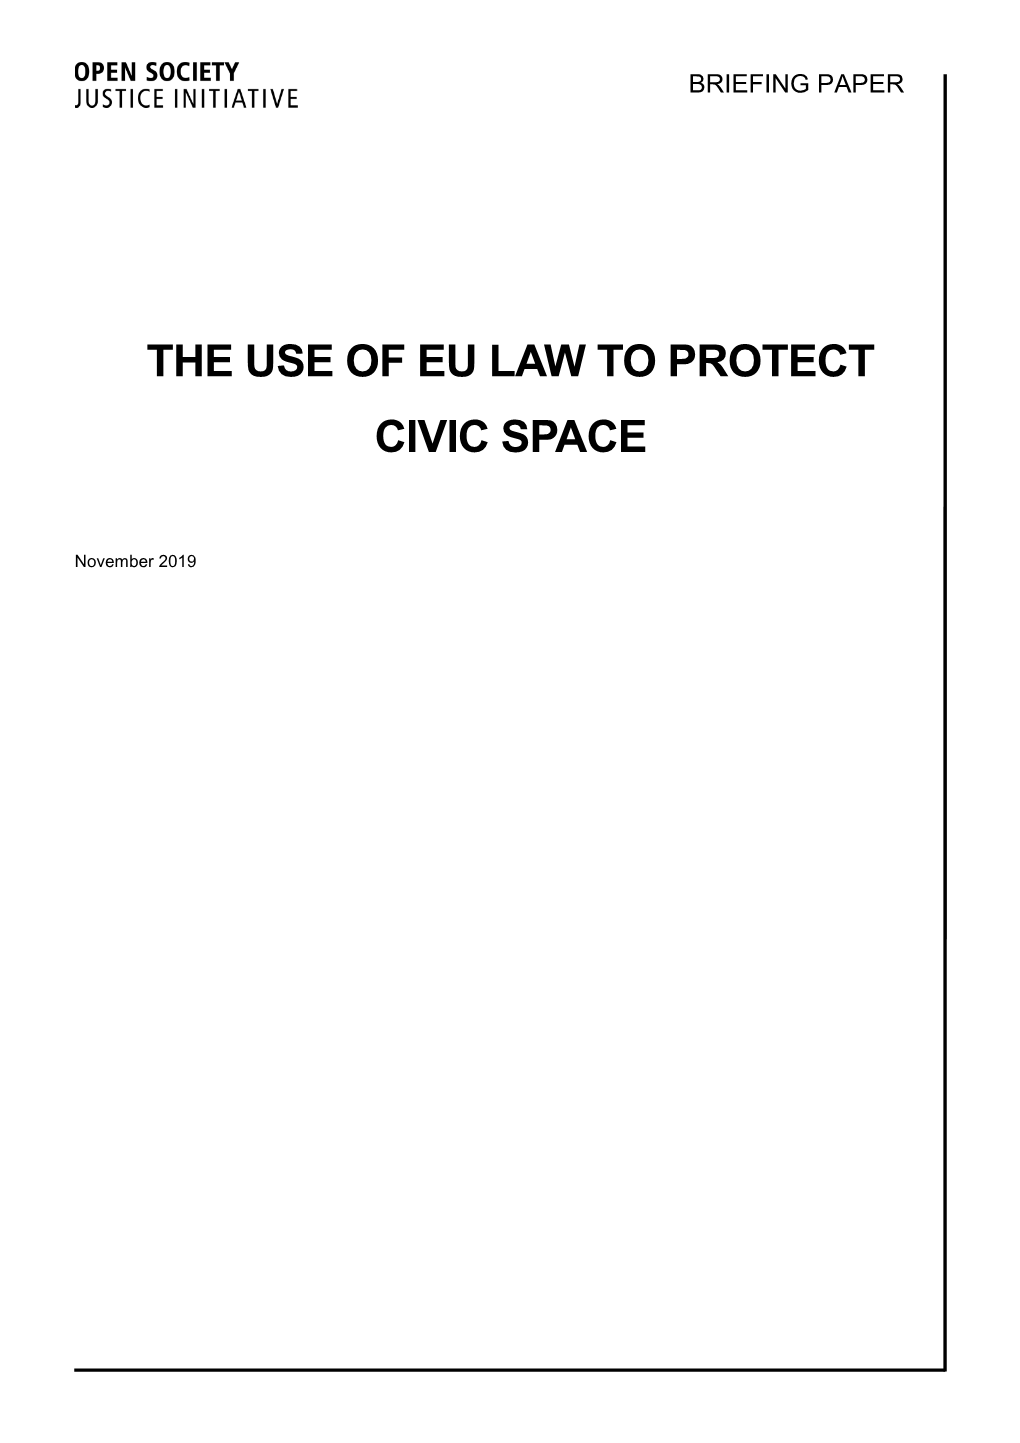 The Use of Eu Law to Protect Civic Space